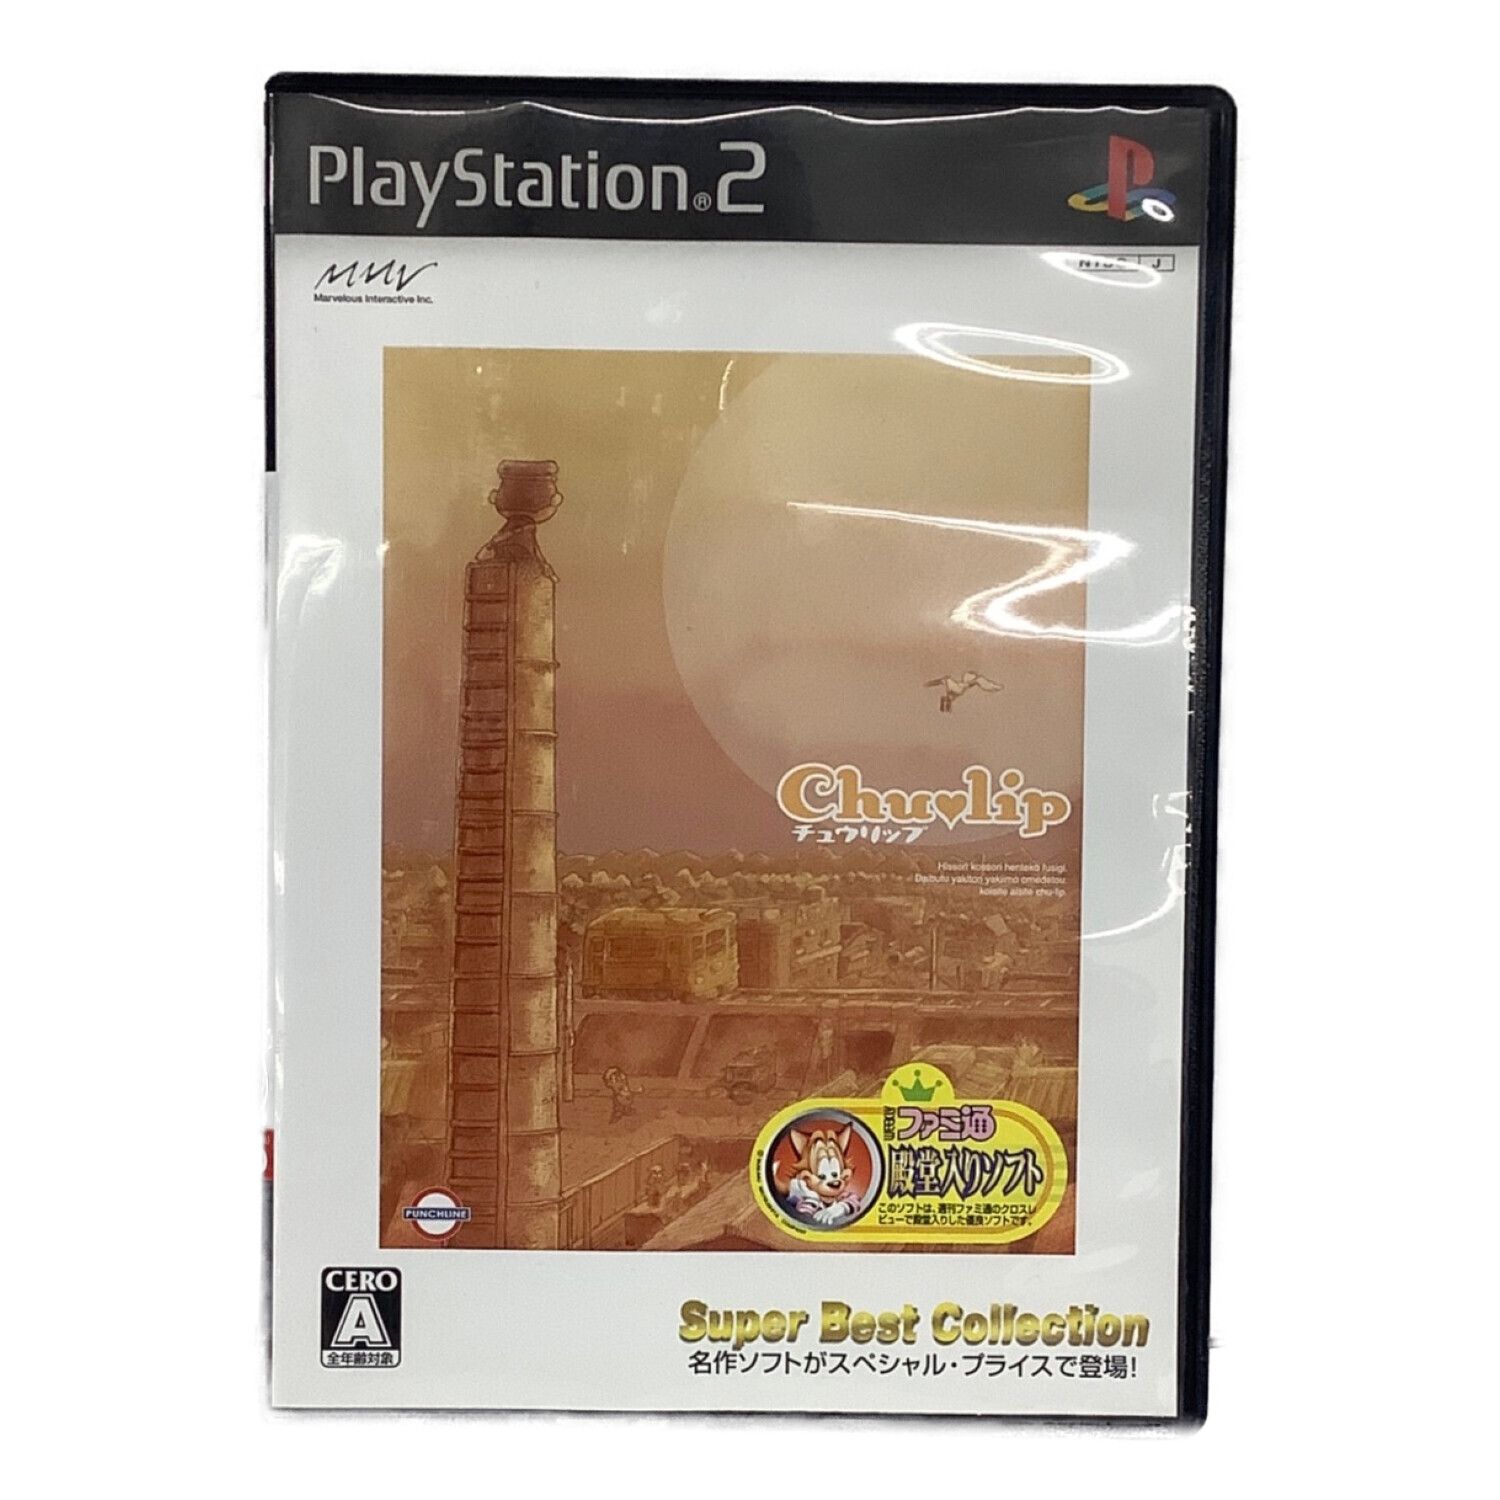 Playstation2用ソフト チュウリップ Chulip Super Best Collection 